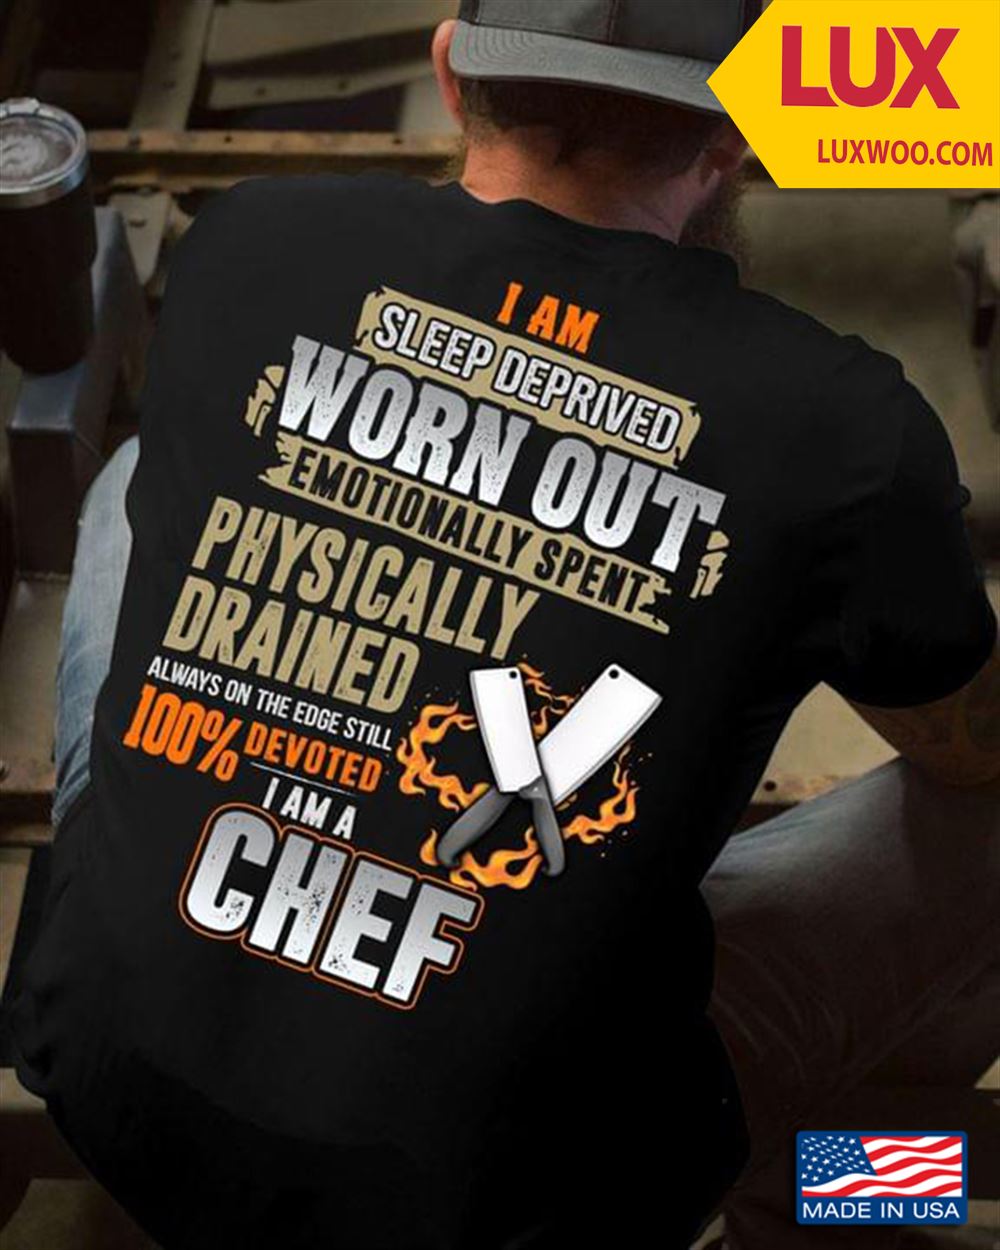 Chef I Am Sleep Deprived Worn Out Emotionally Spent Physically Drained Always On The Edge Shirt Size Up To 5xl